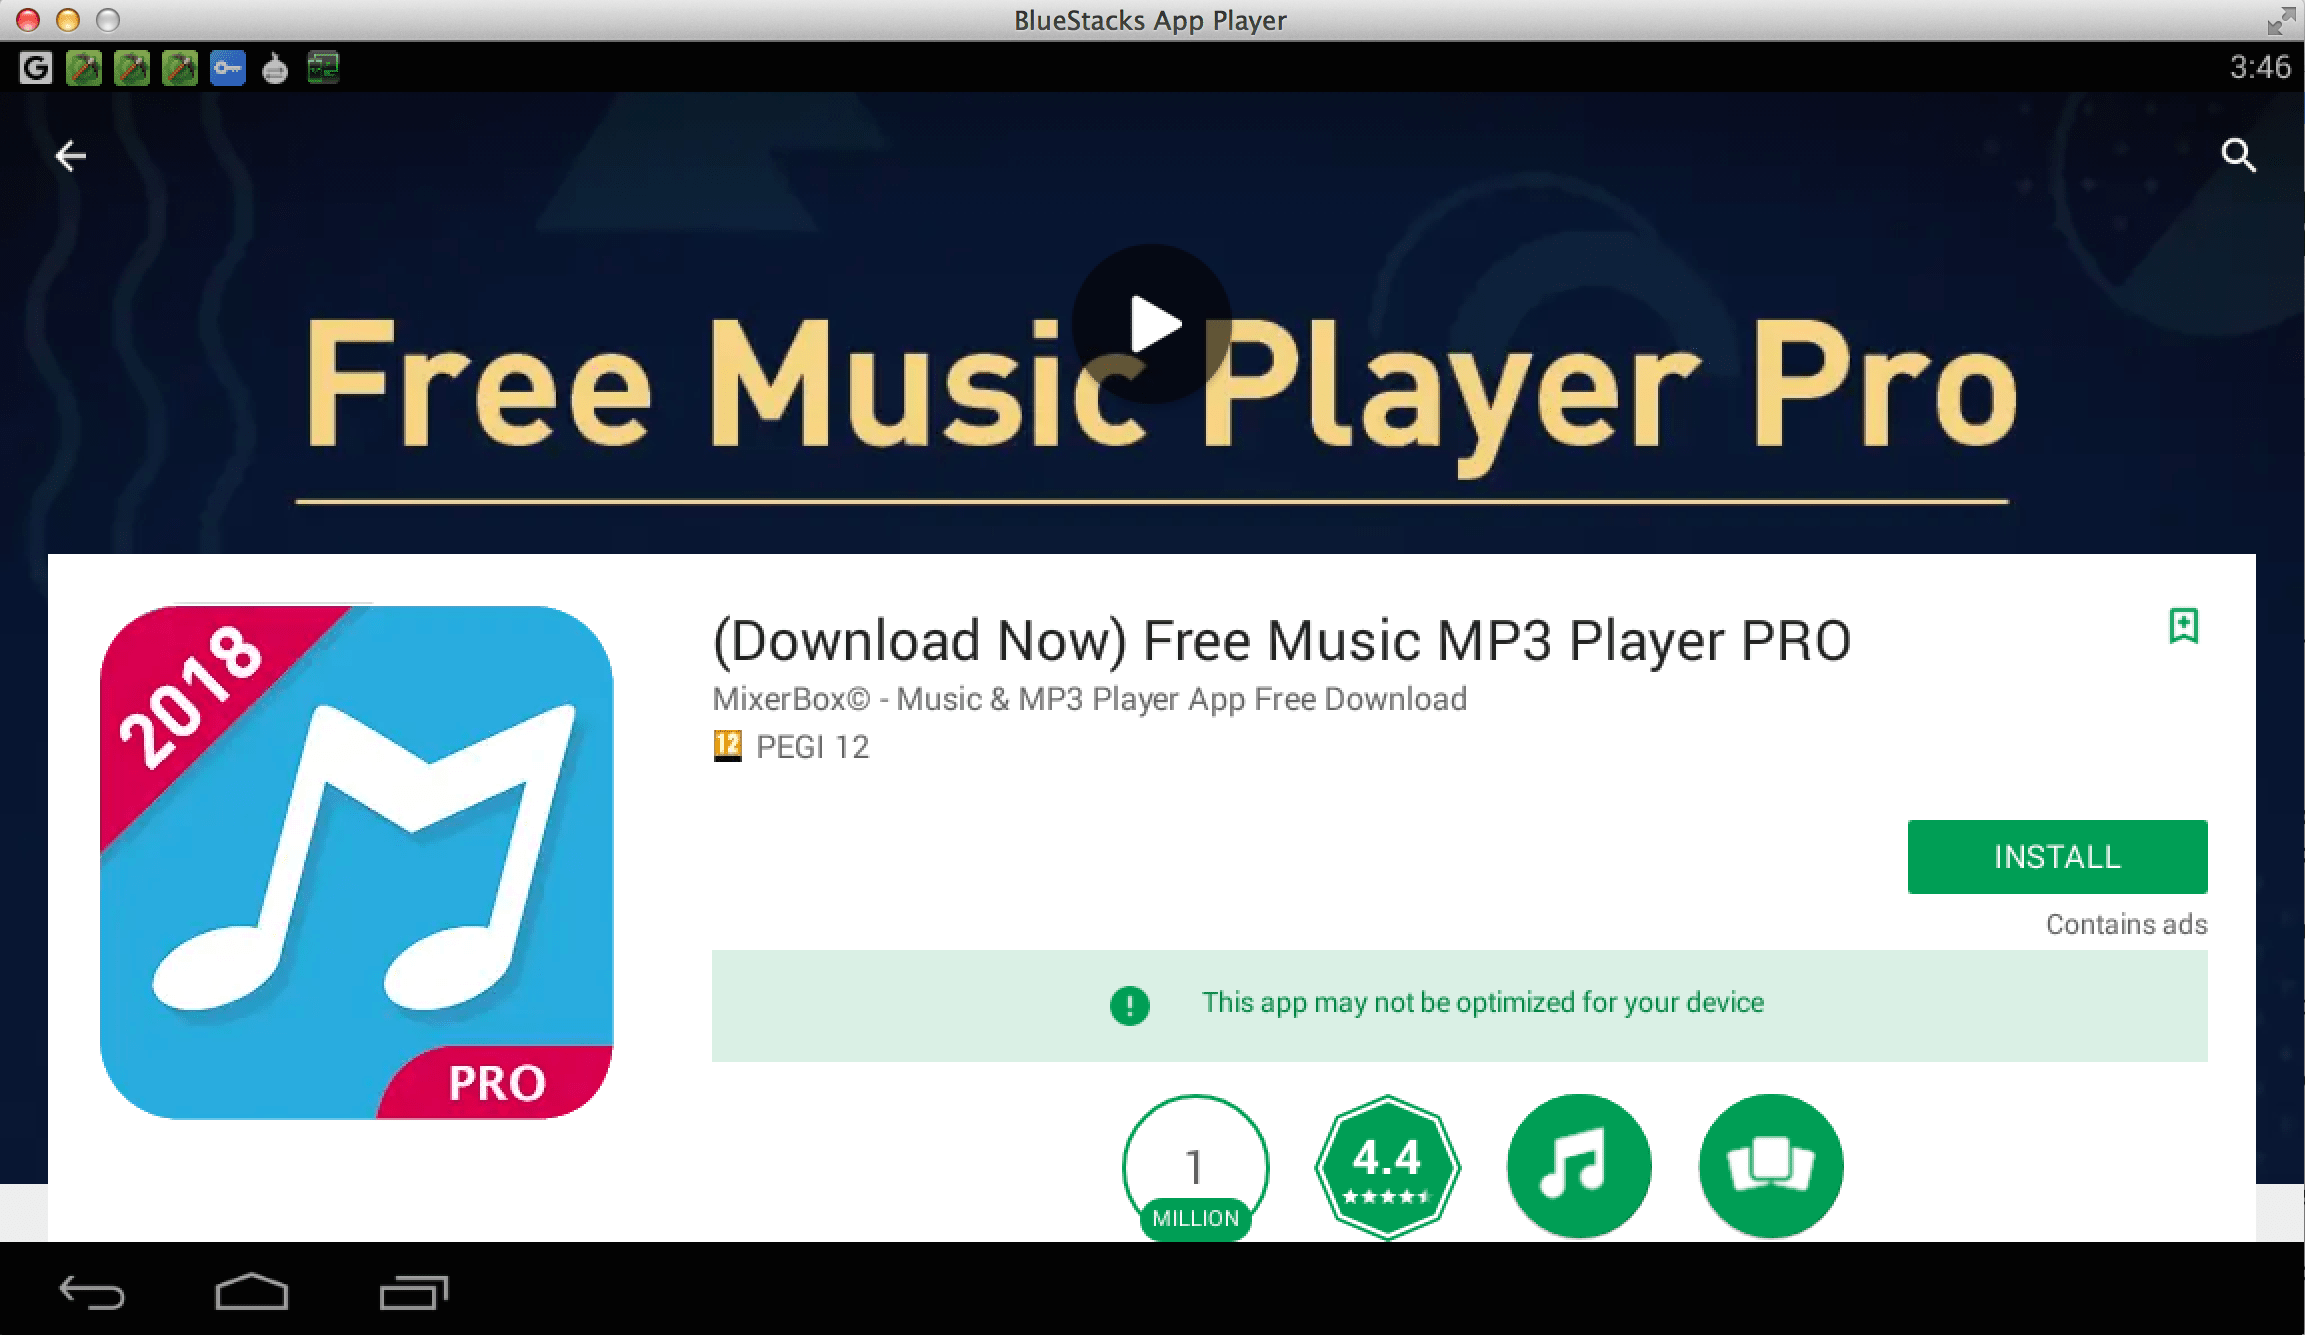 download free music to computer from internet 2018